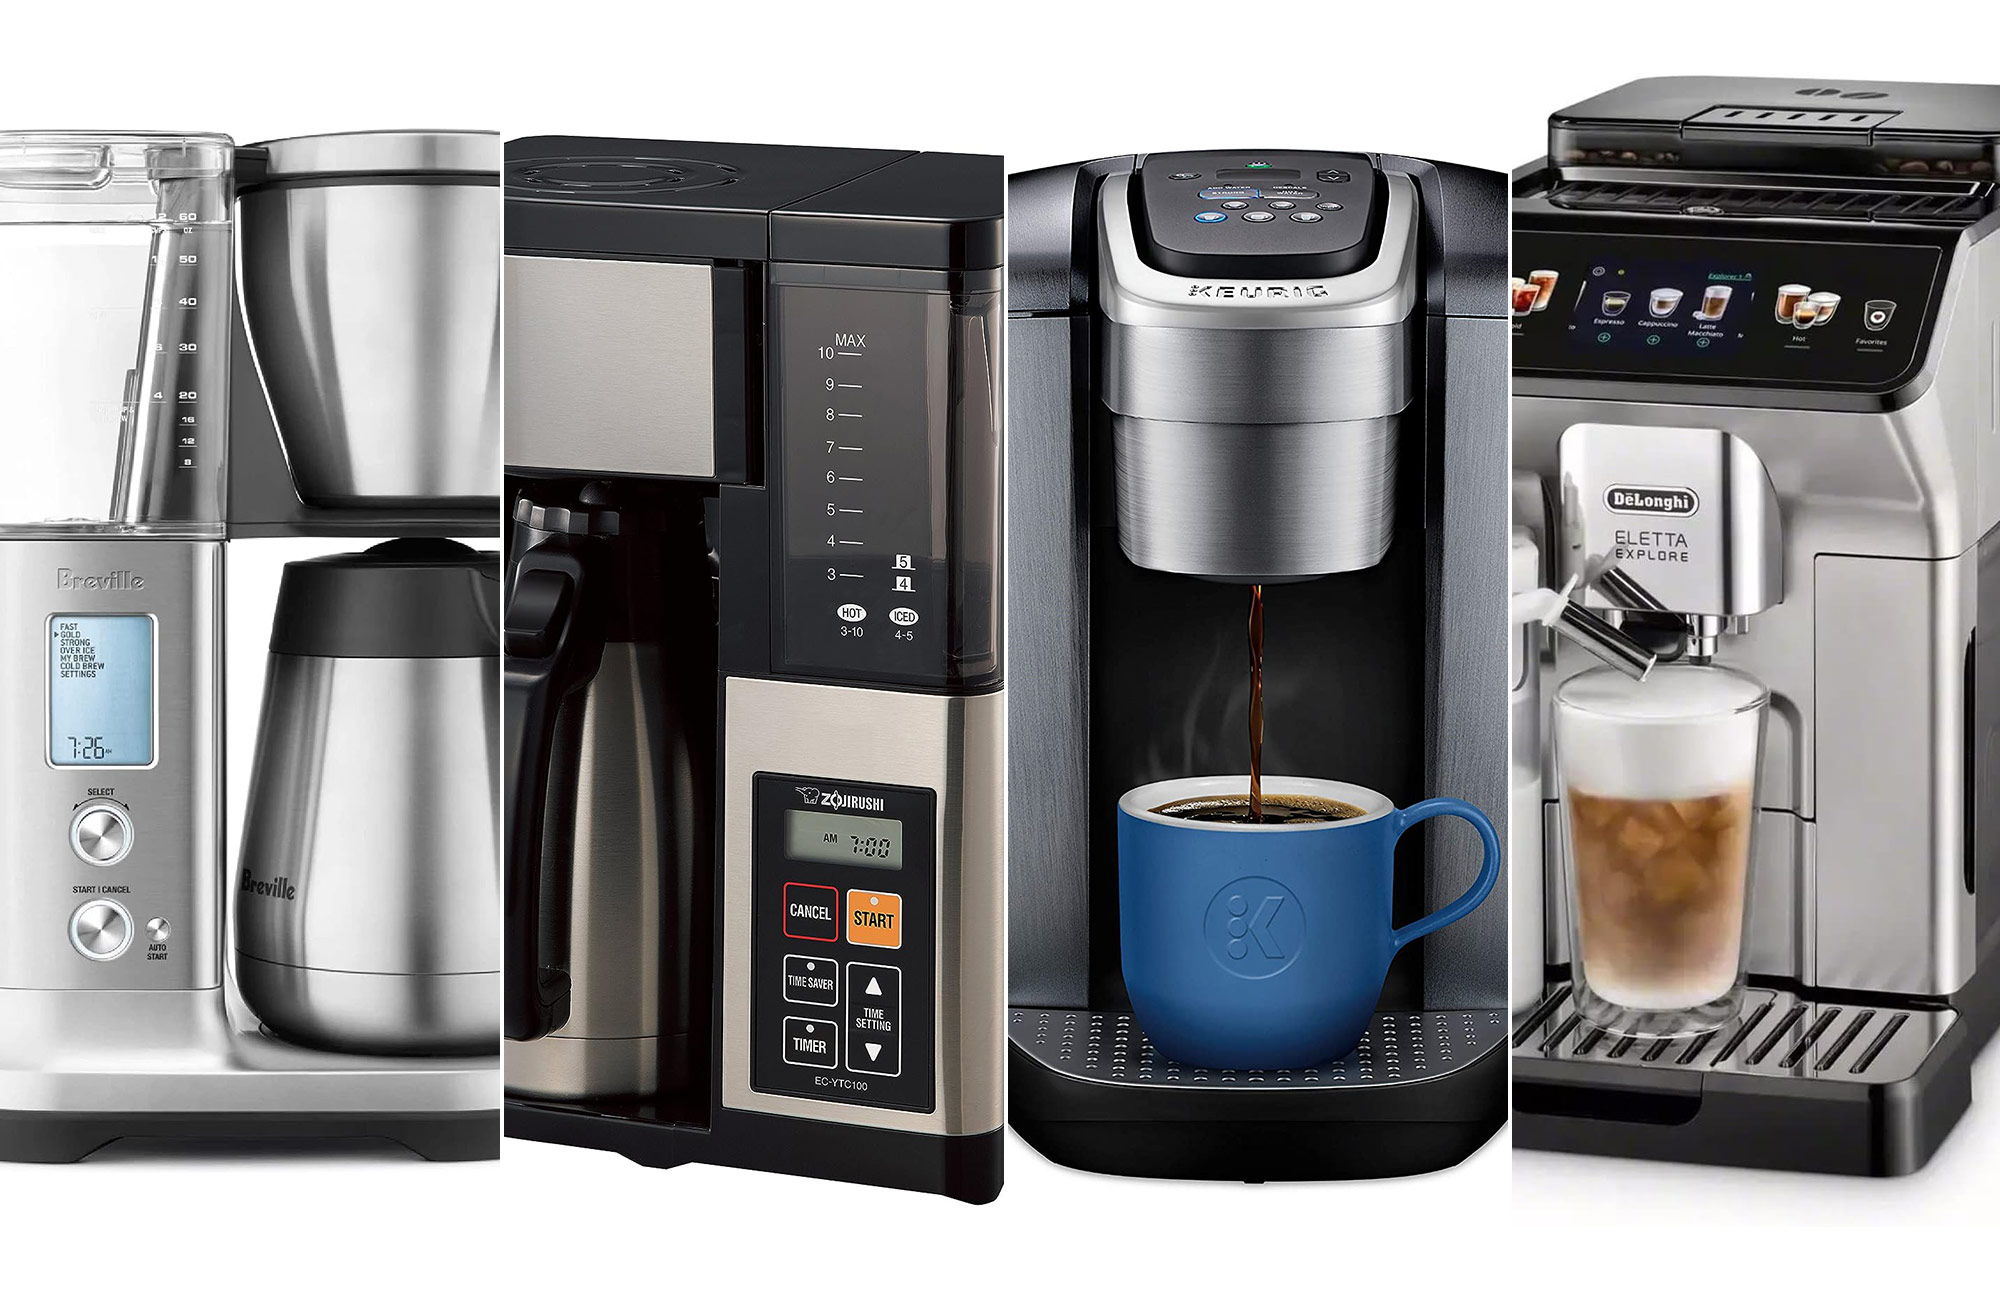 The 12 best iced coffee makers to shop in 2023